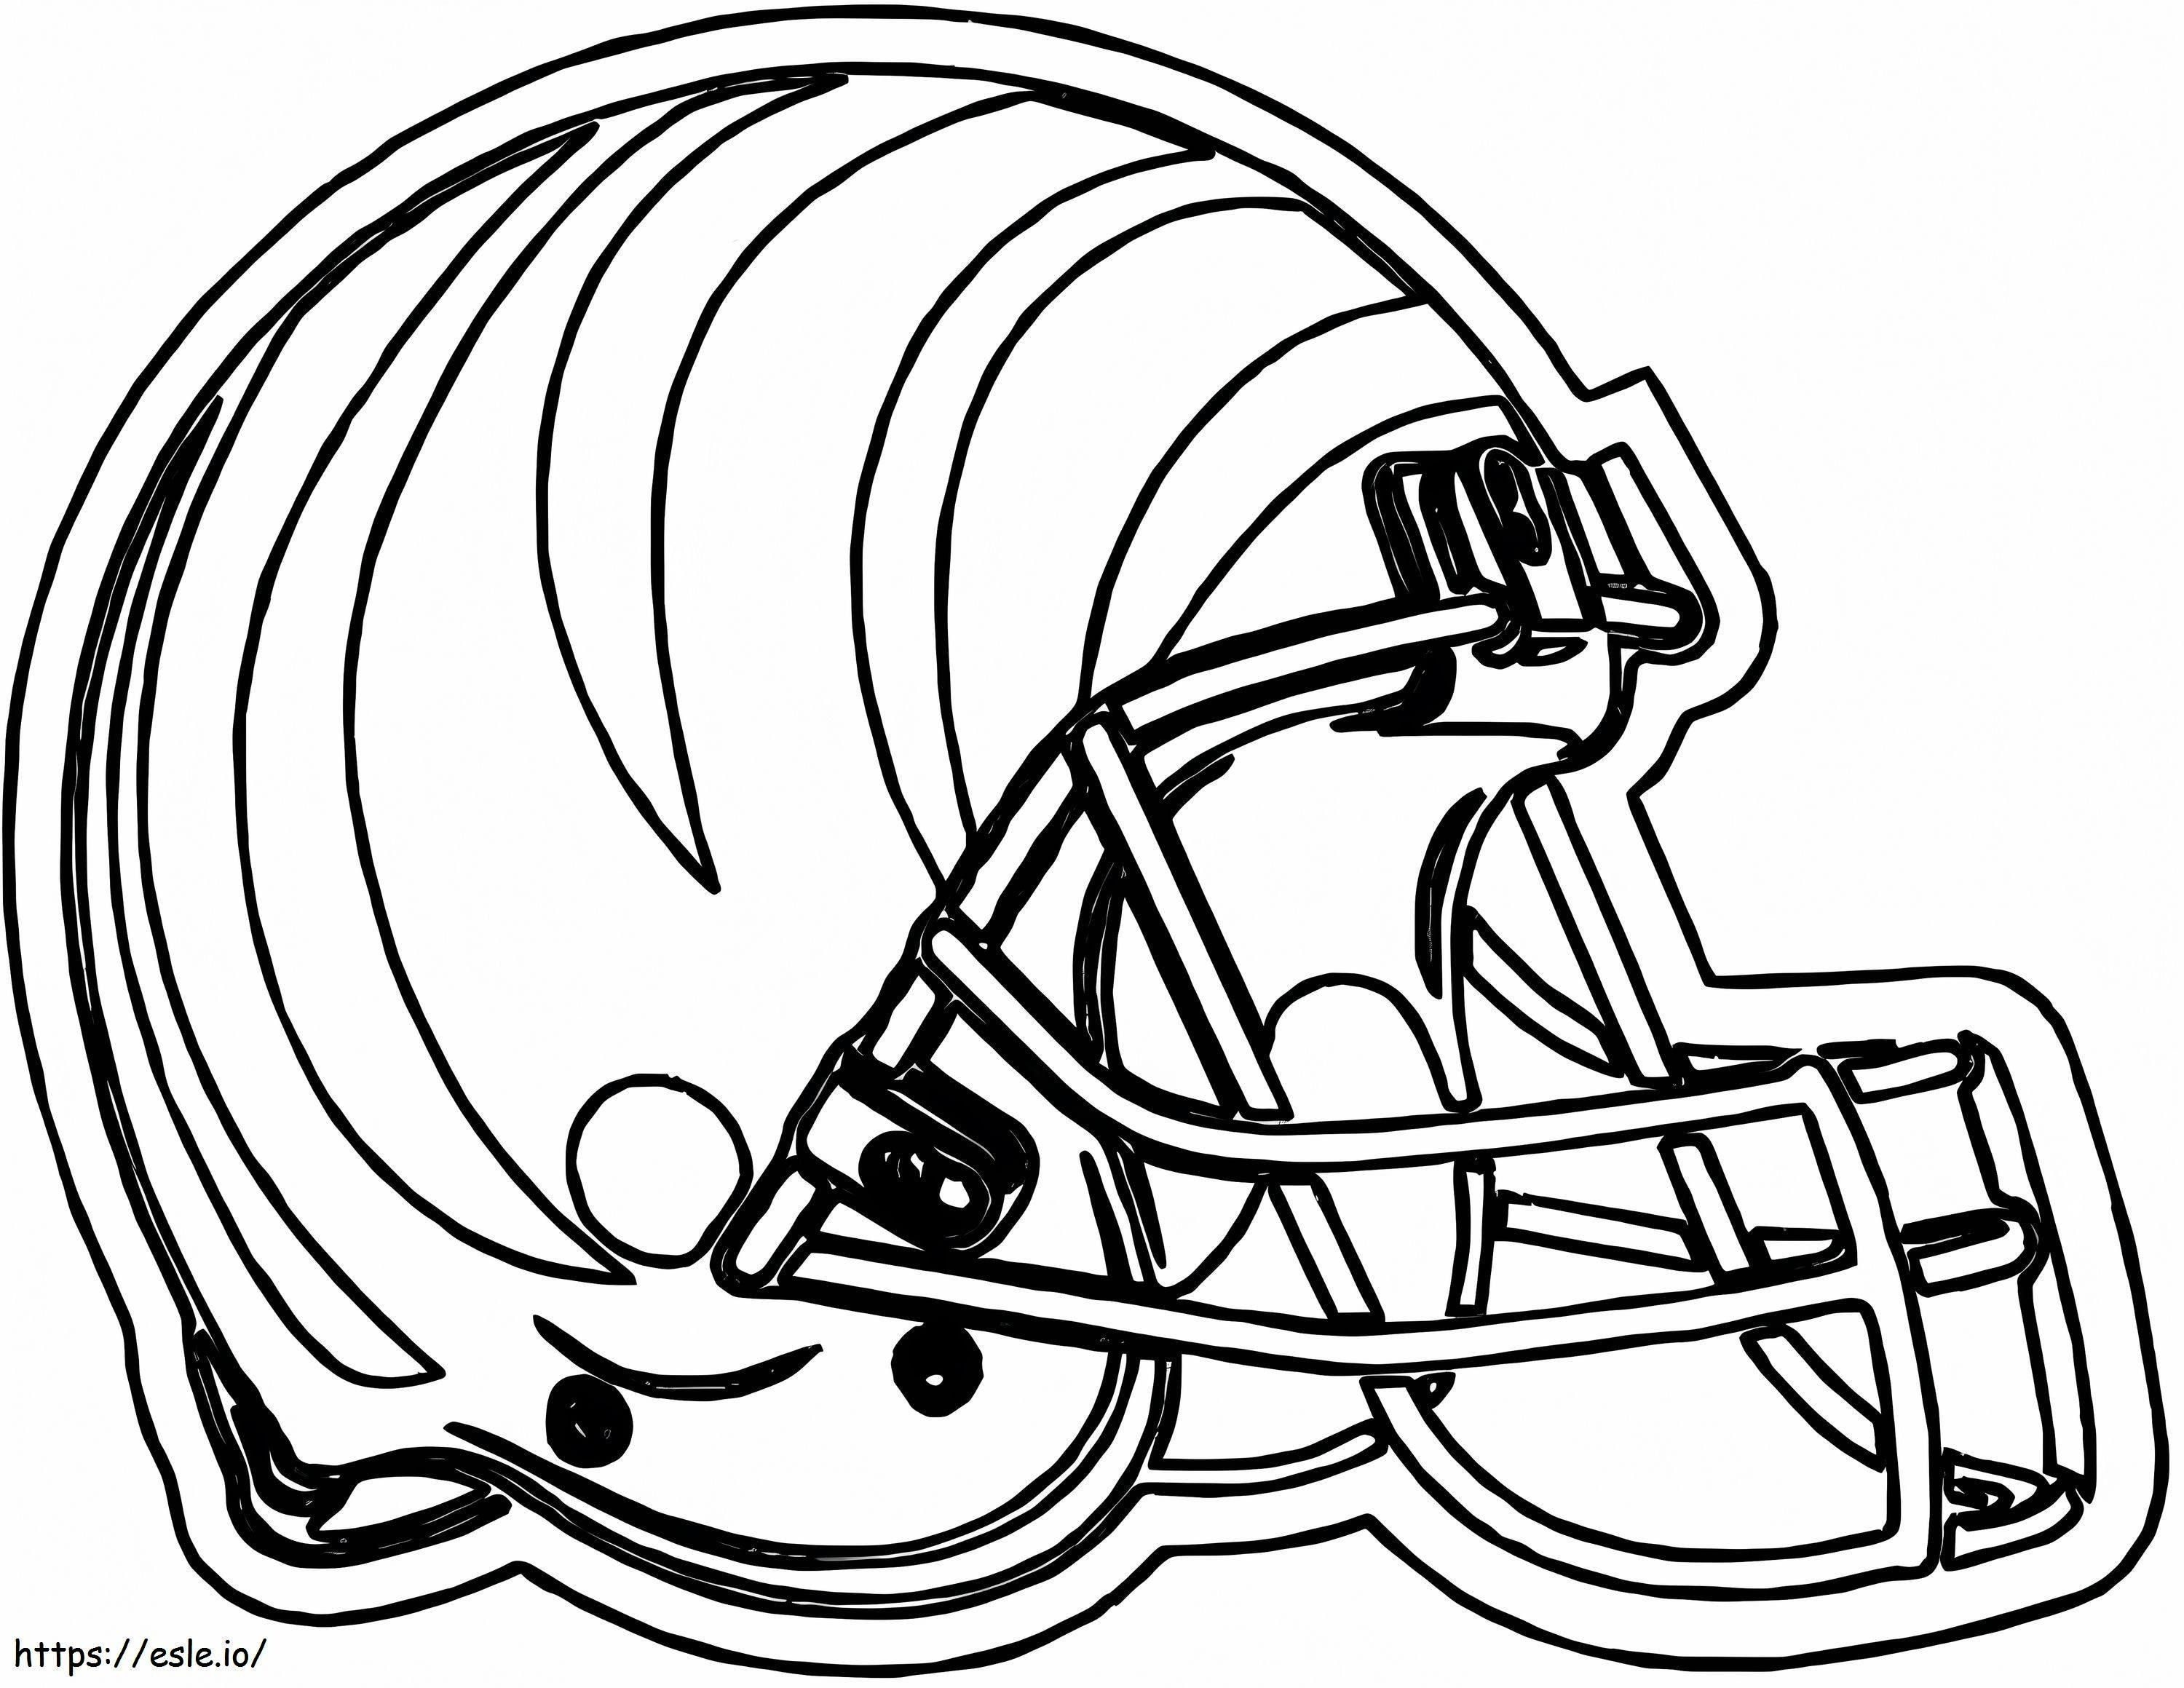 A Football Helmet coloring page